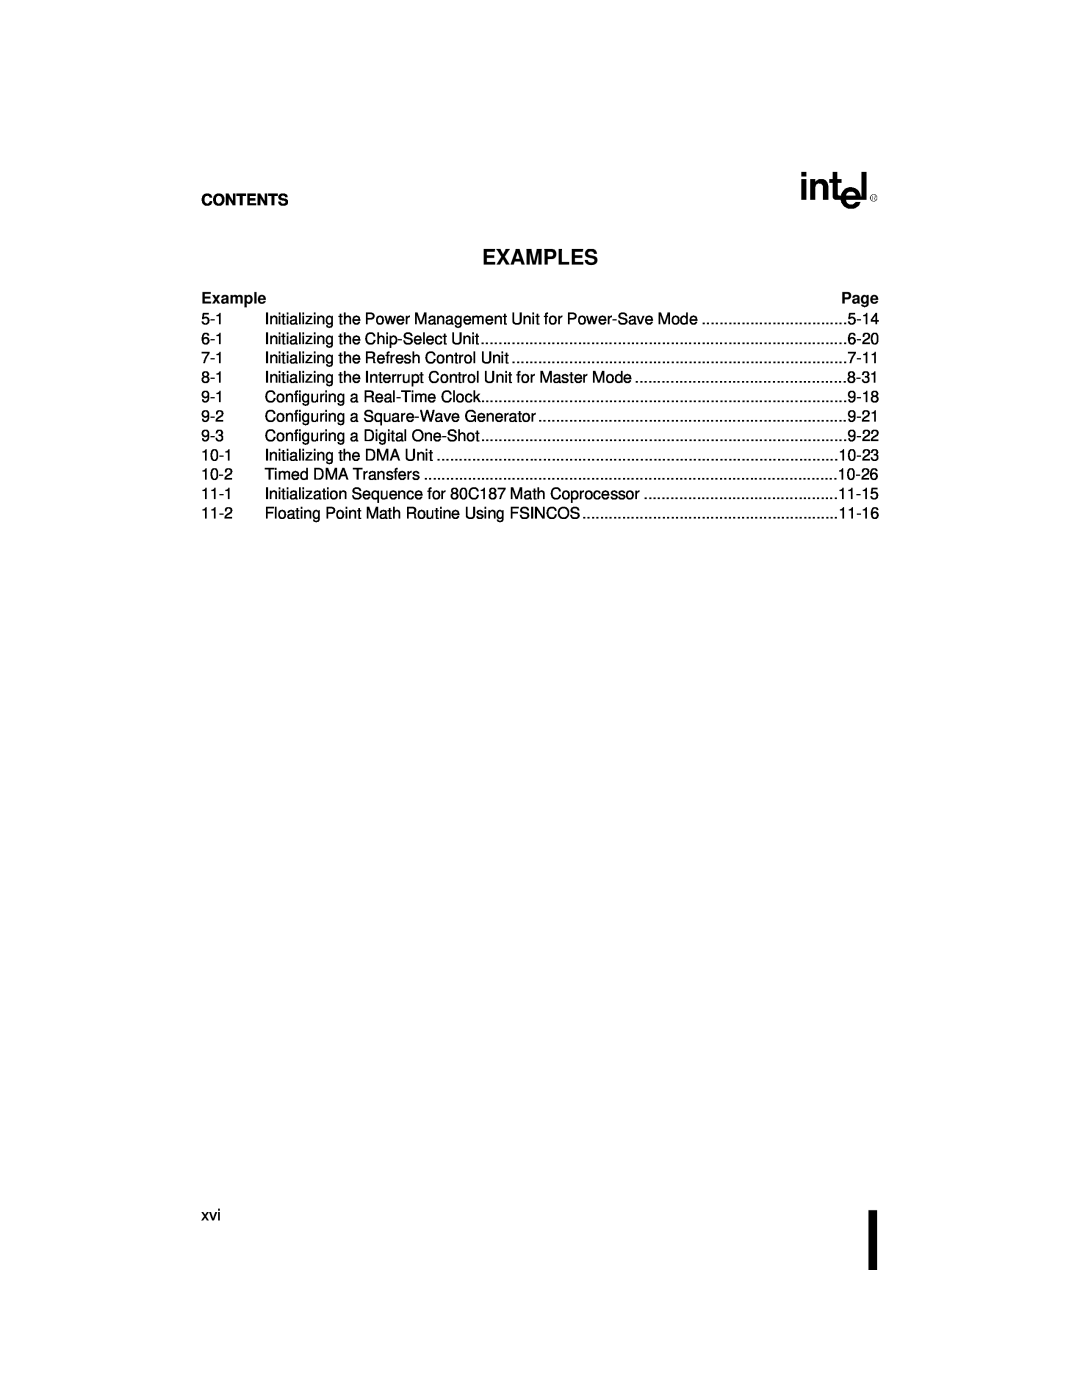 Intel 80C186XL, 80C188XL user manual Examples, Contents, Page 